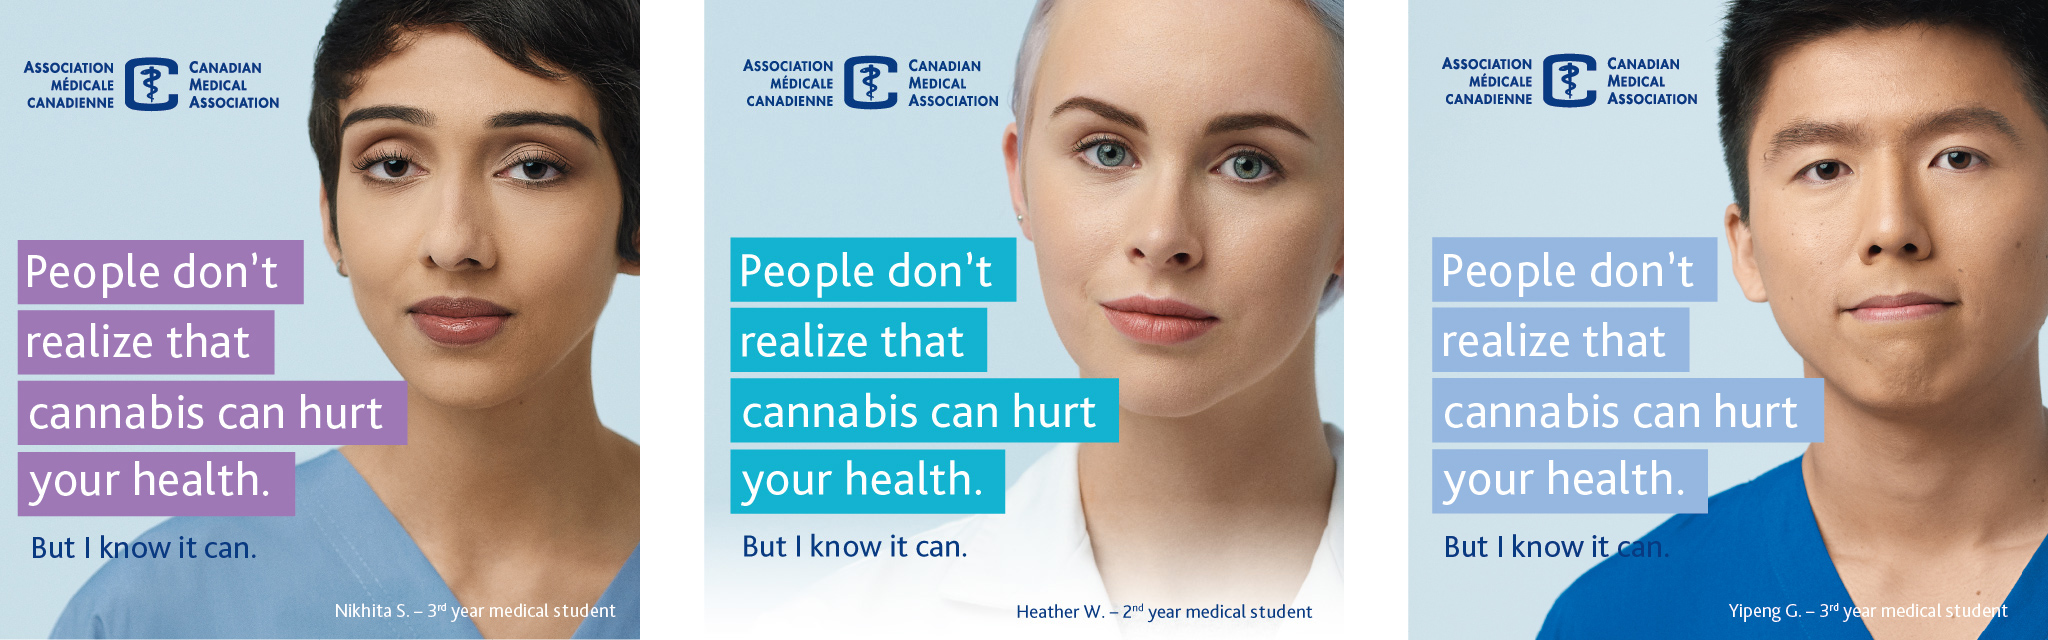 Cannabis awareness campaign | Client: Canadian Medical Association | Agency: Banfield